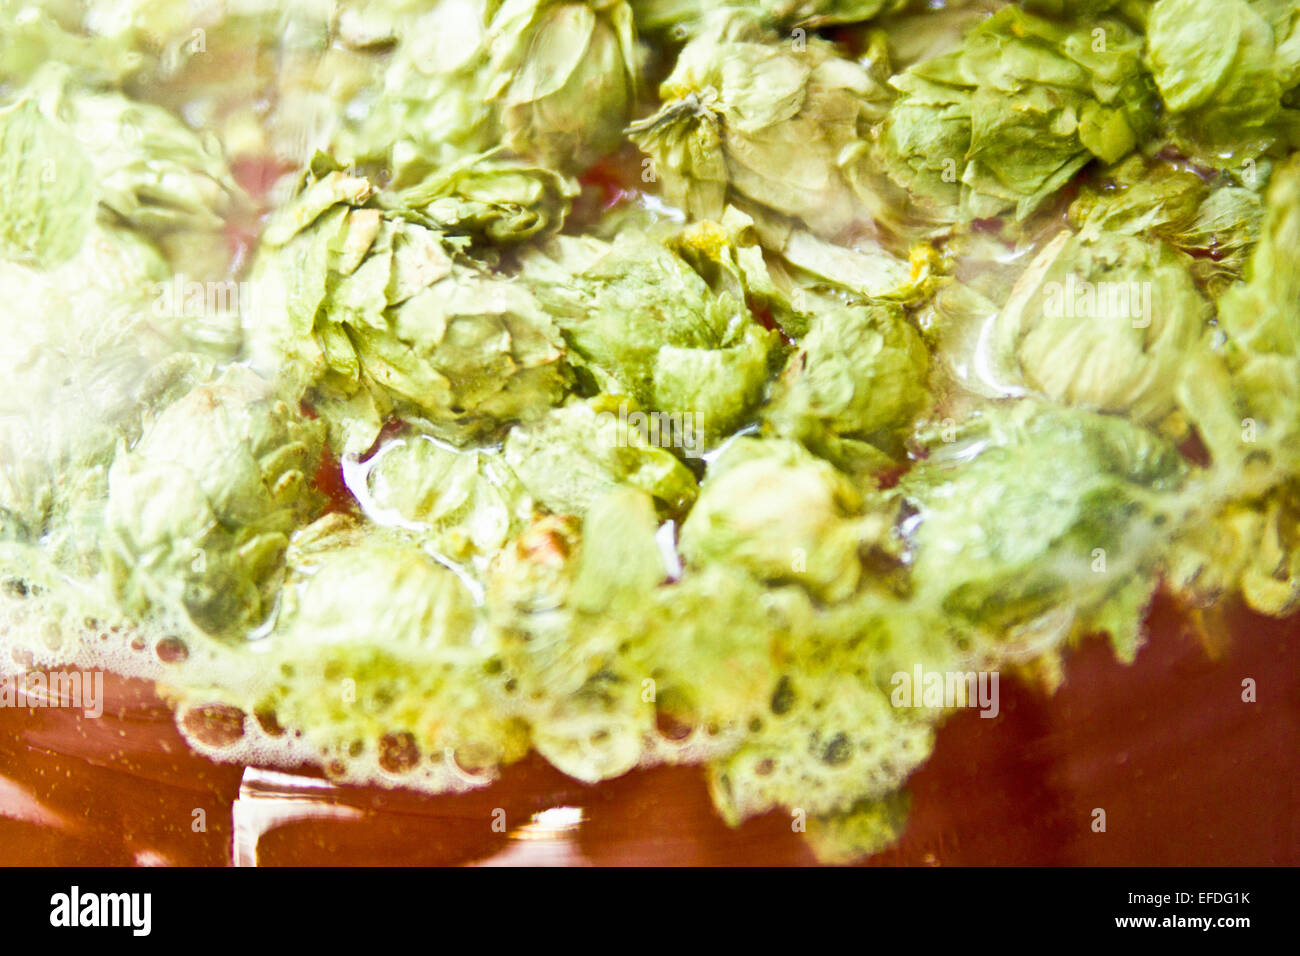 Hops floating in homebrewed Beer during Dry hopping Stock Photo